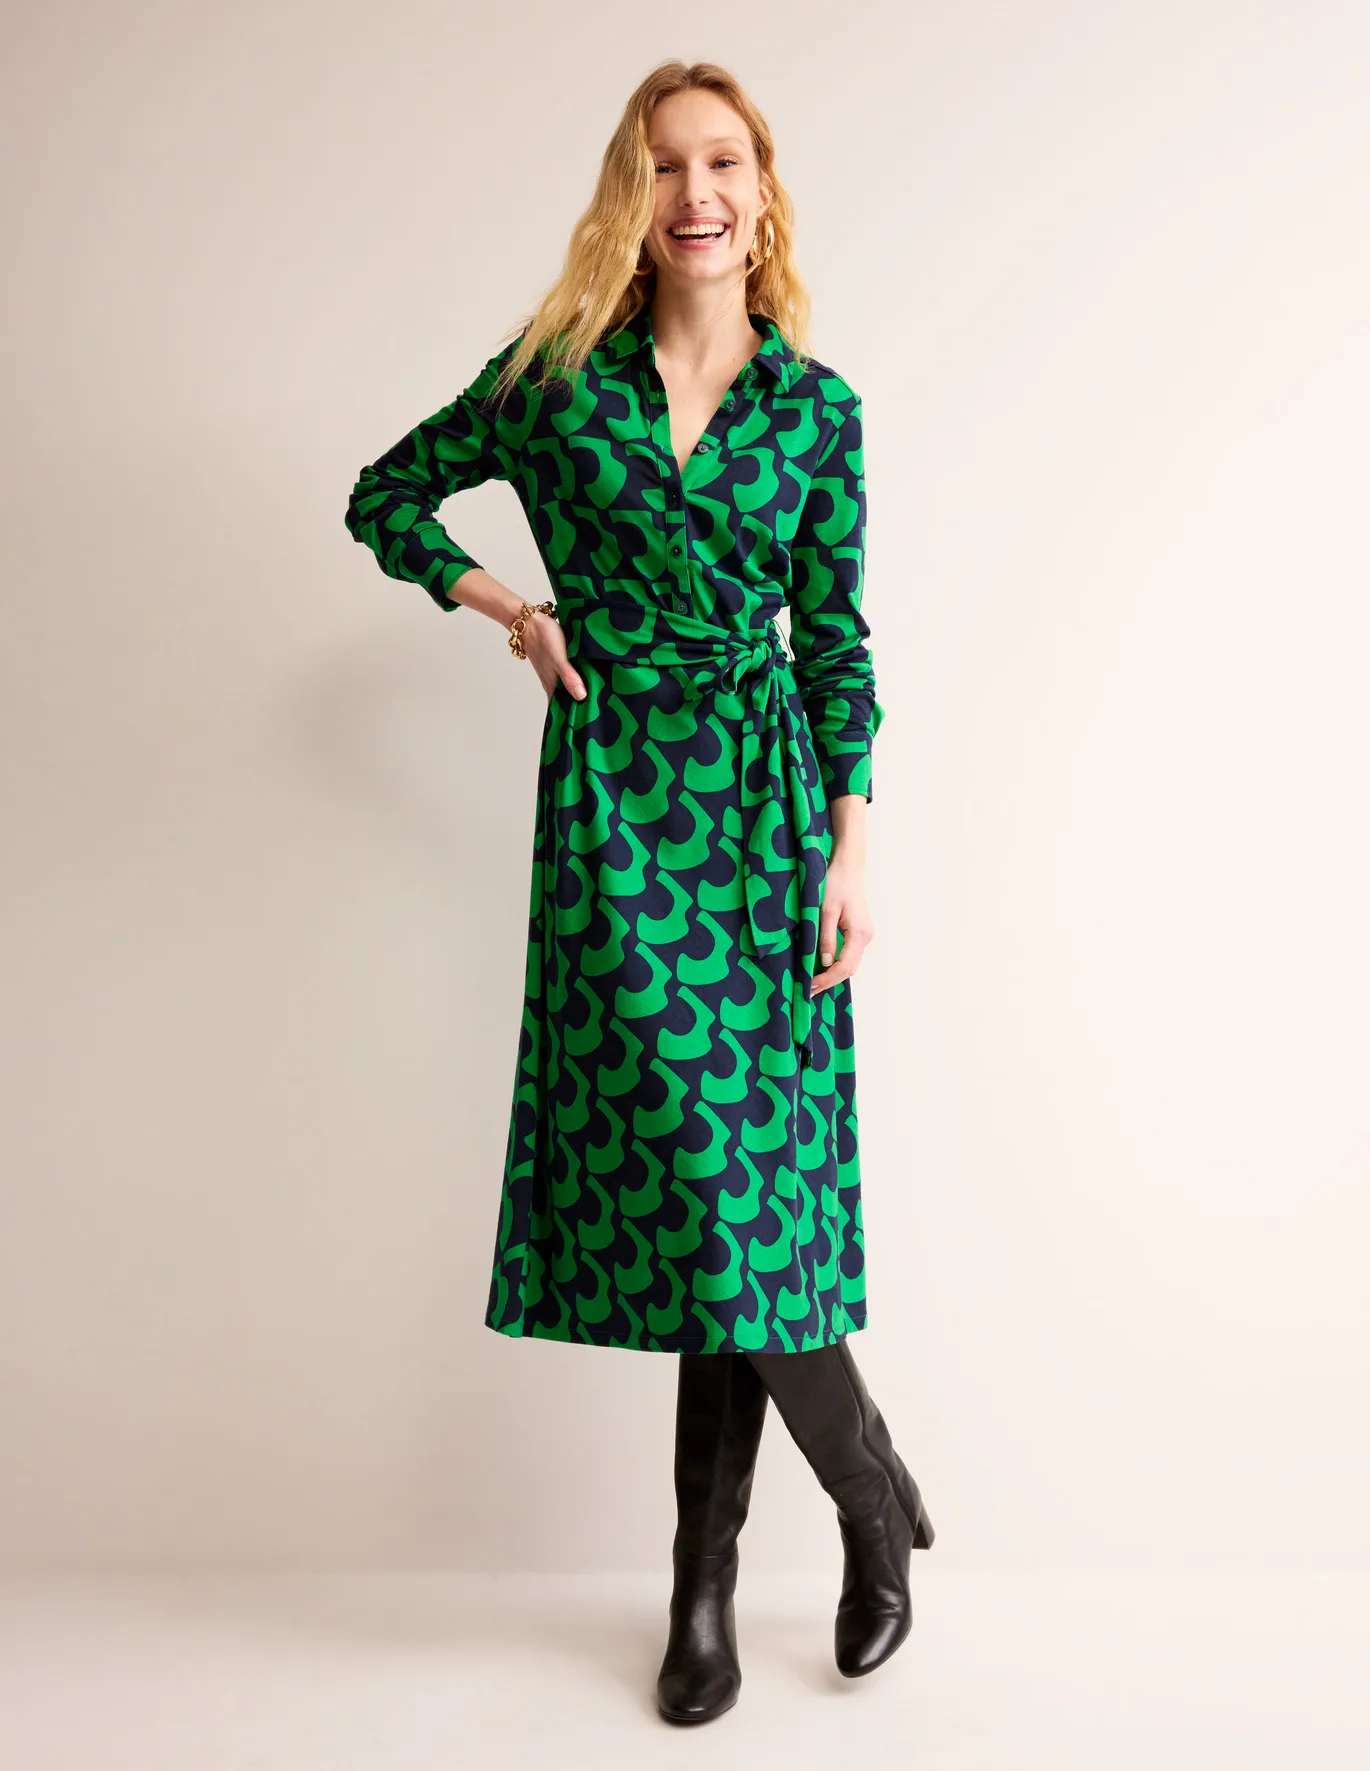 Refresh your work wardrobe this spring with our guide to the best dresses for the office. From chic maxis to playful prints, find the perfect dress to boost your professional look. Spring Dress Outfits | Spring Dress Outfit | Spring Dress Outfit Ideas | Spring Dresses Classy | Spring Dress Idea | Spring Dresses Idea | Spring Dresses For Work | Spring Dress For Work | Spring Dress Cute | Work Outfit Women | Business Professional | Formal Attire Women | Corporate Outfit | Business Attire Women